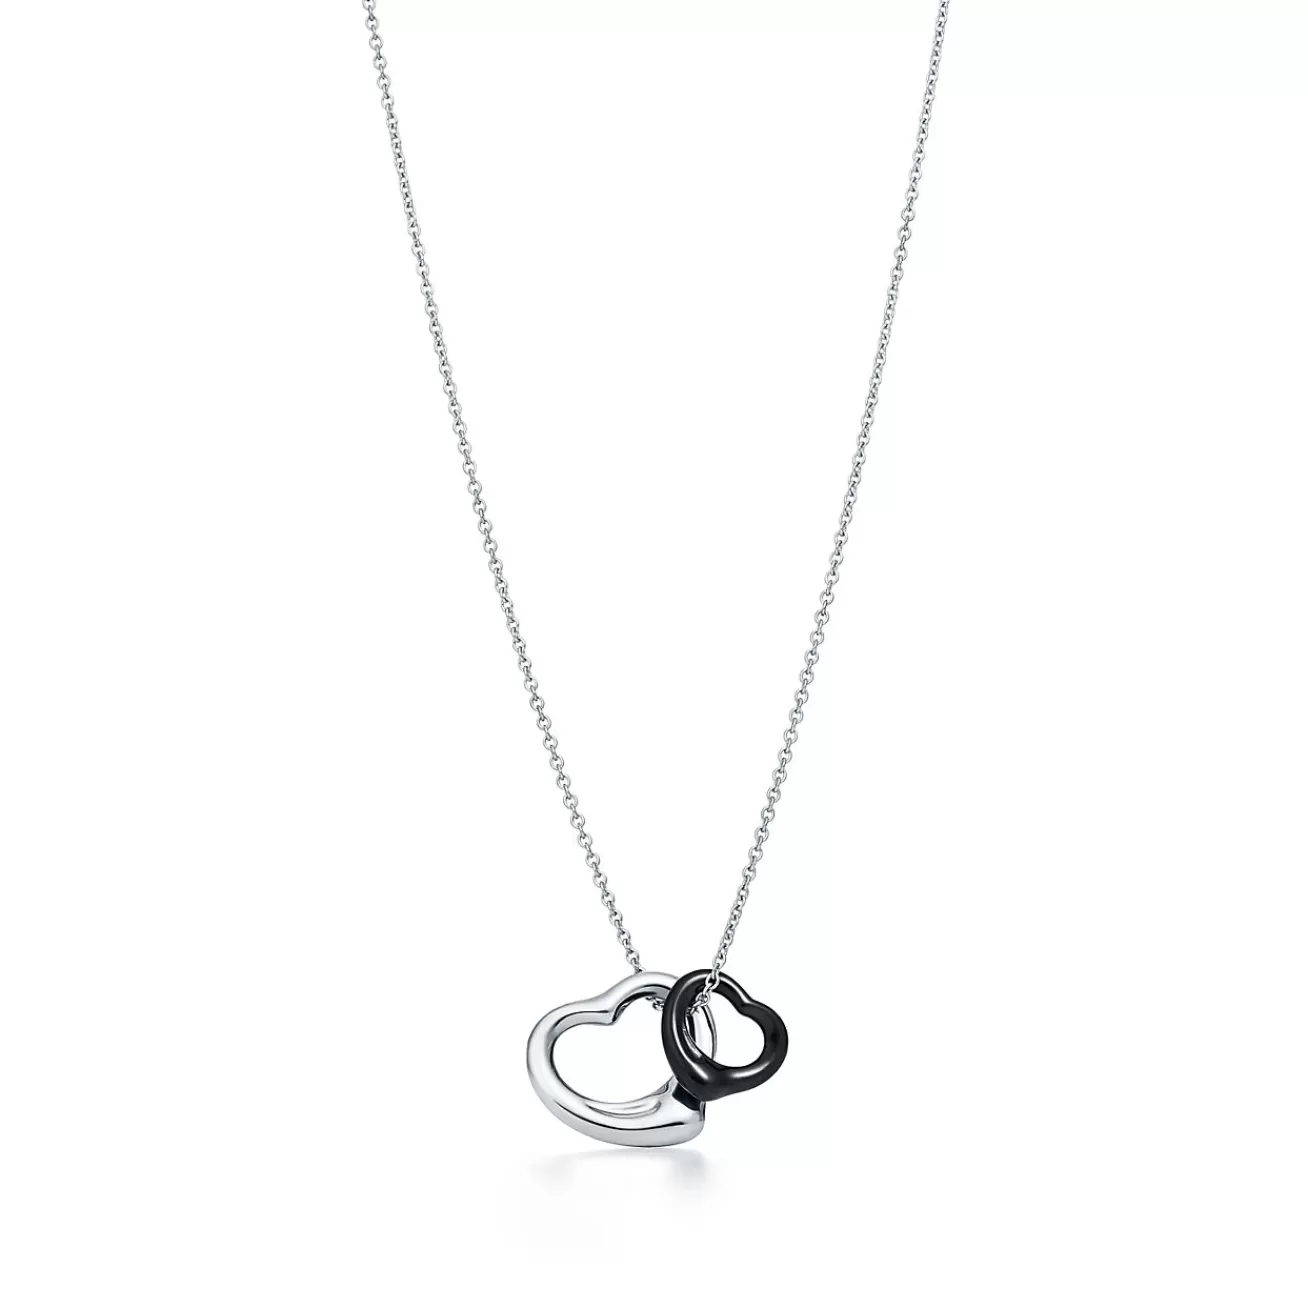 Tiffany & Co. Elsa Peretti® Open Heart pendant in sterling silver and black jade. | ^ Necklaces & Pendants | Sterling Silver Jewelry